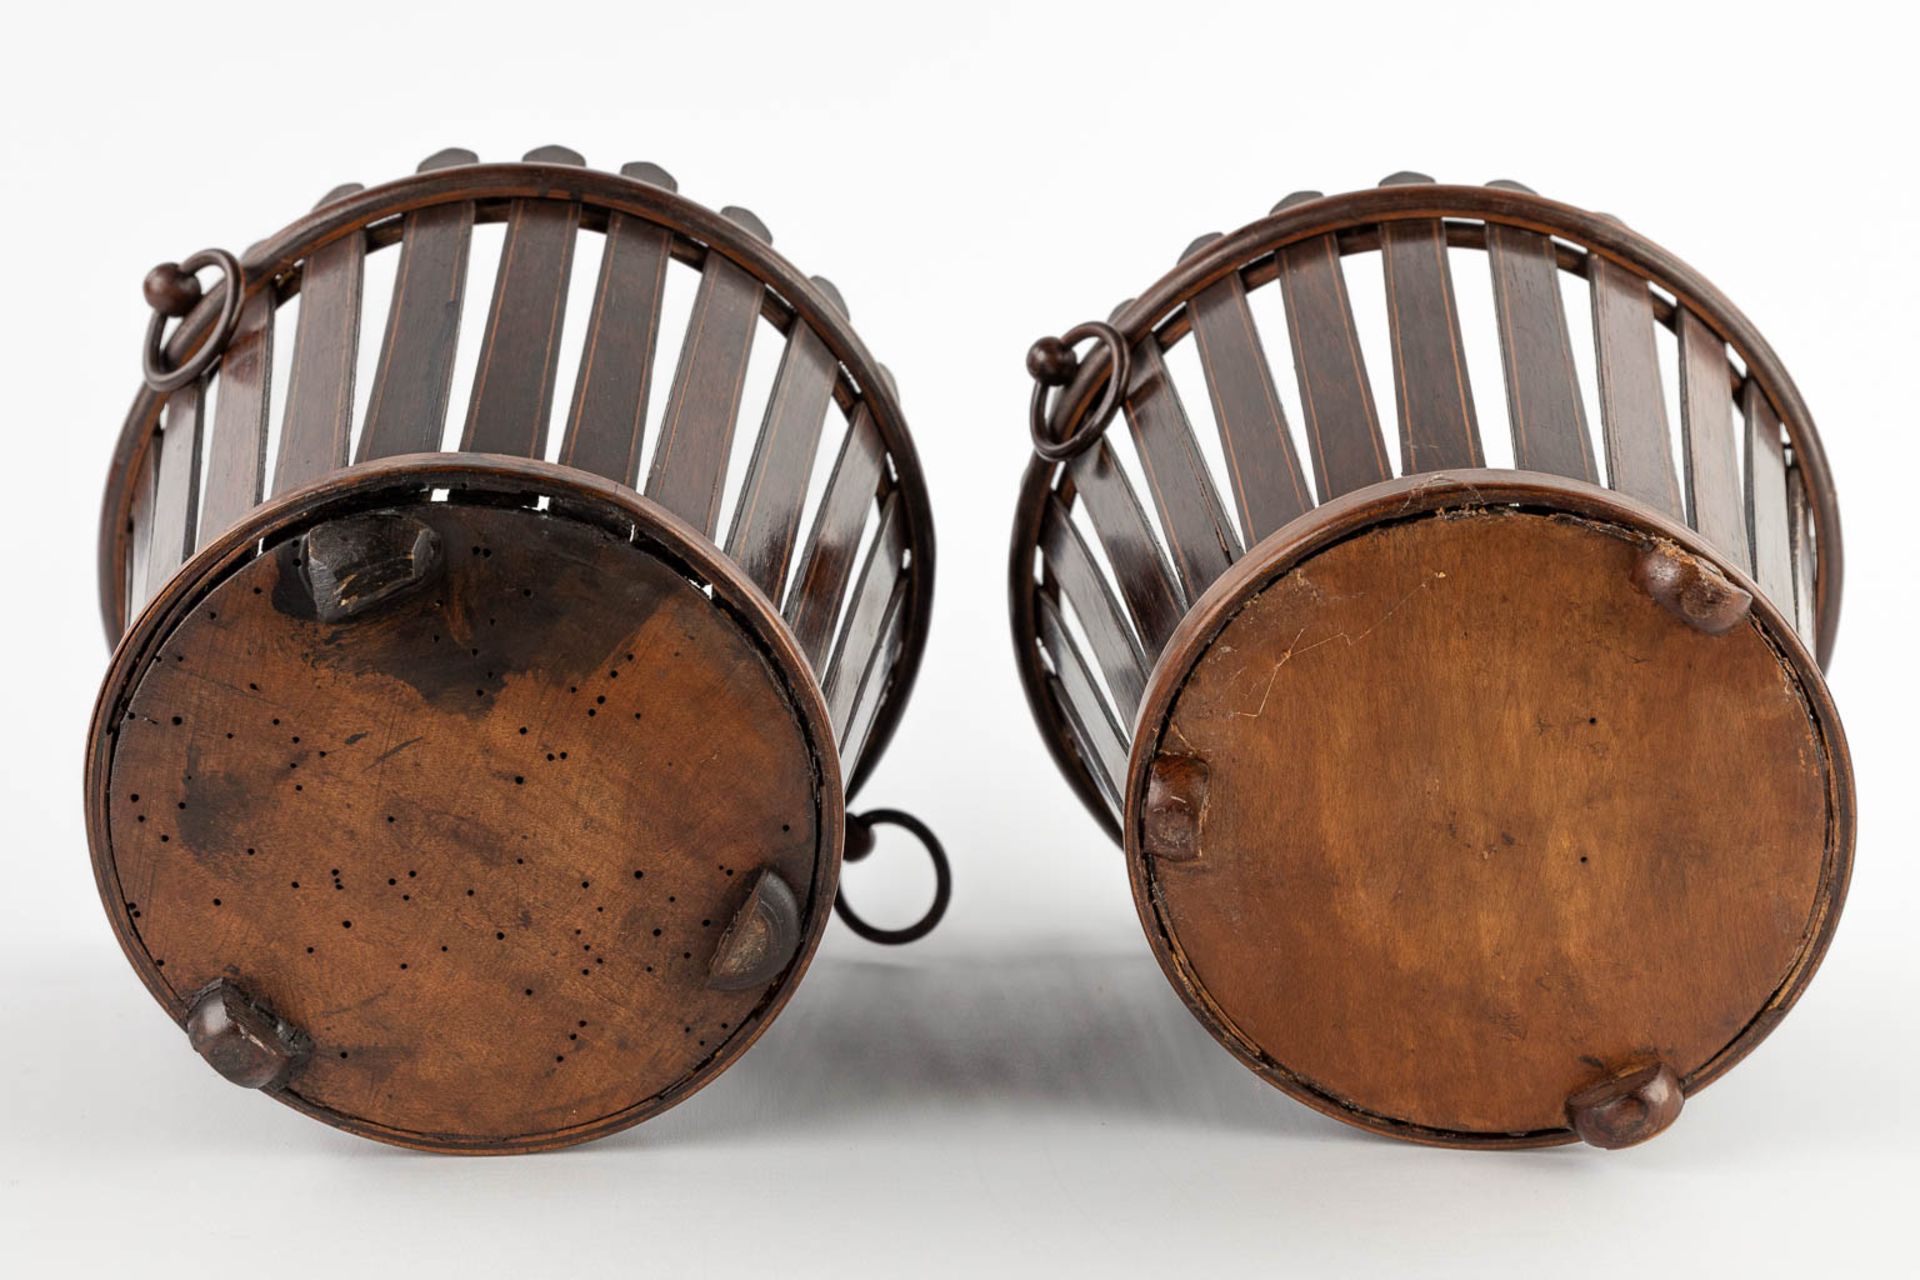 A pair of Edwardian flower baskets, mahogany, England. (H:21 x D:23 cm) - Image 7 of 11